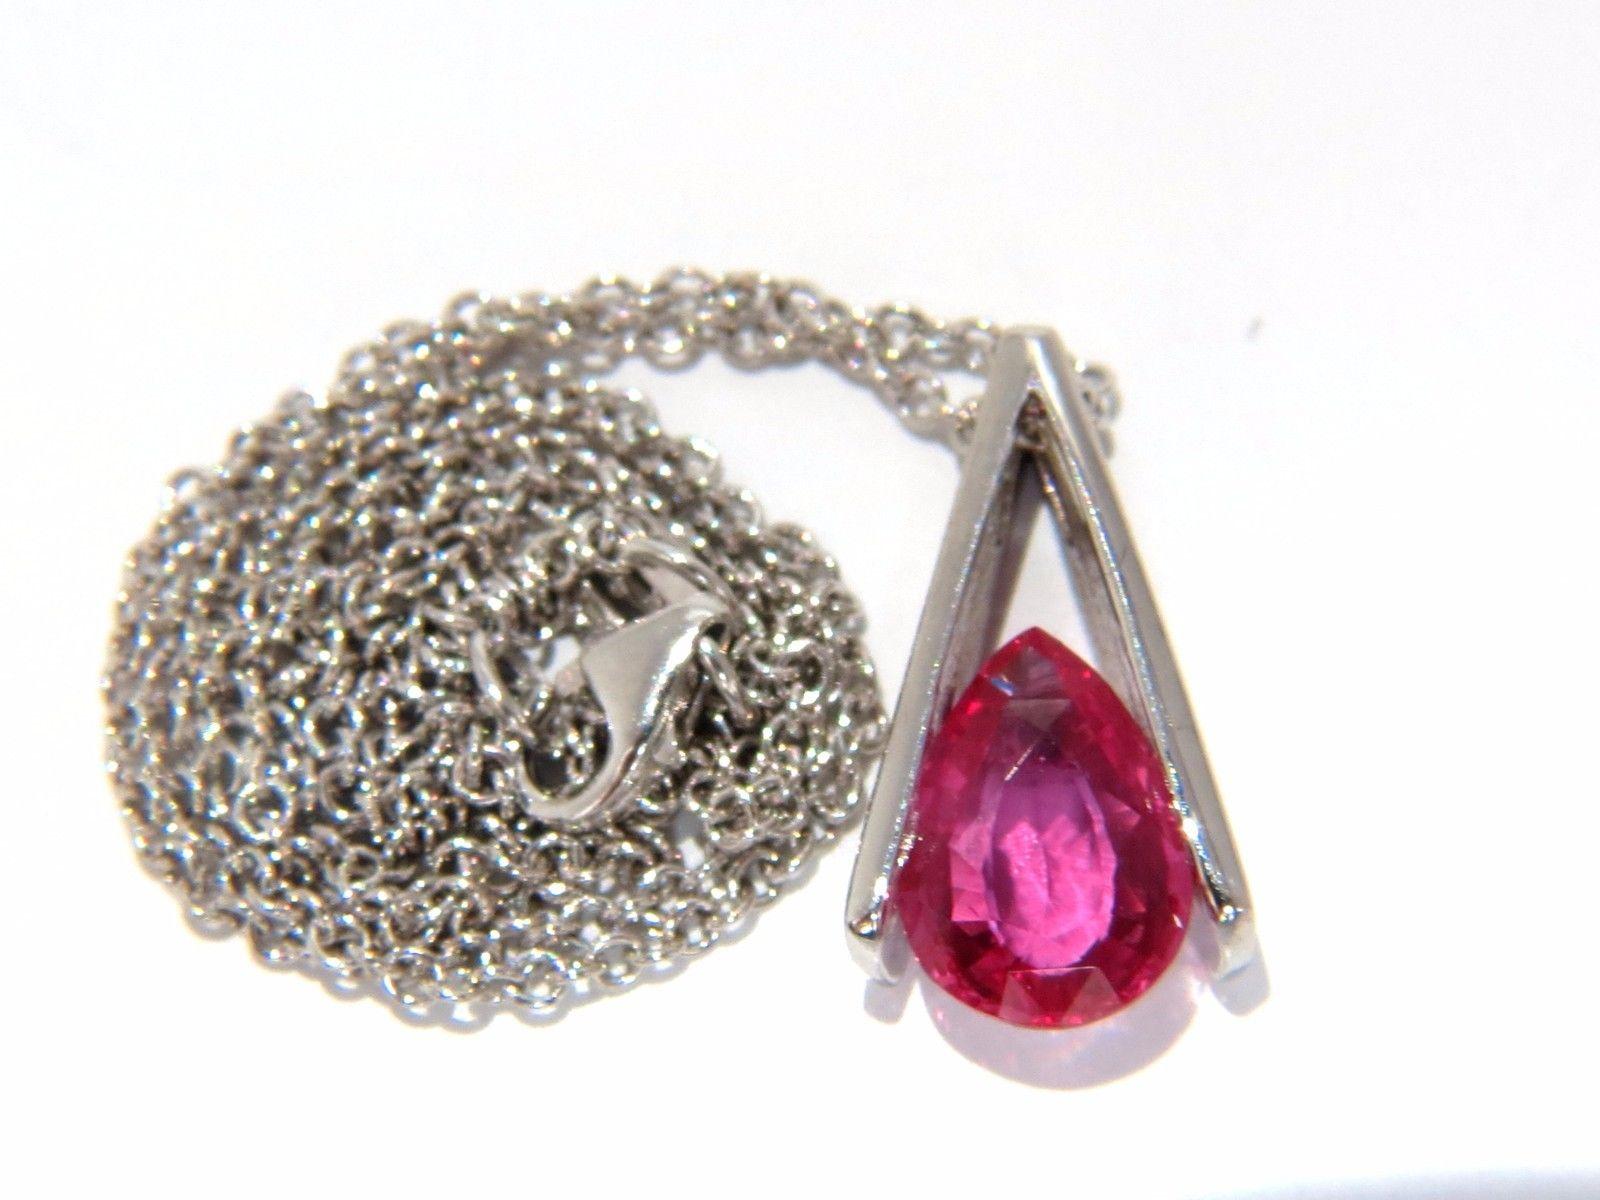 Women's or Men's 1.80CT Natural Bright Pear Shaped Pink Sapphire Pendant Masonic Drop 14KT